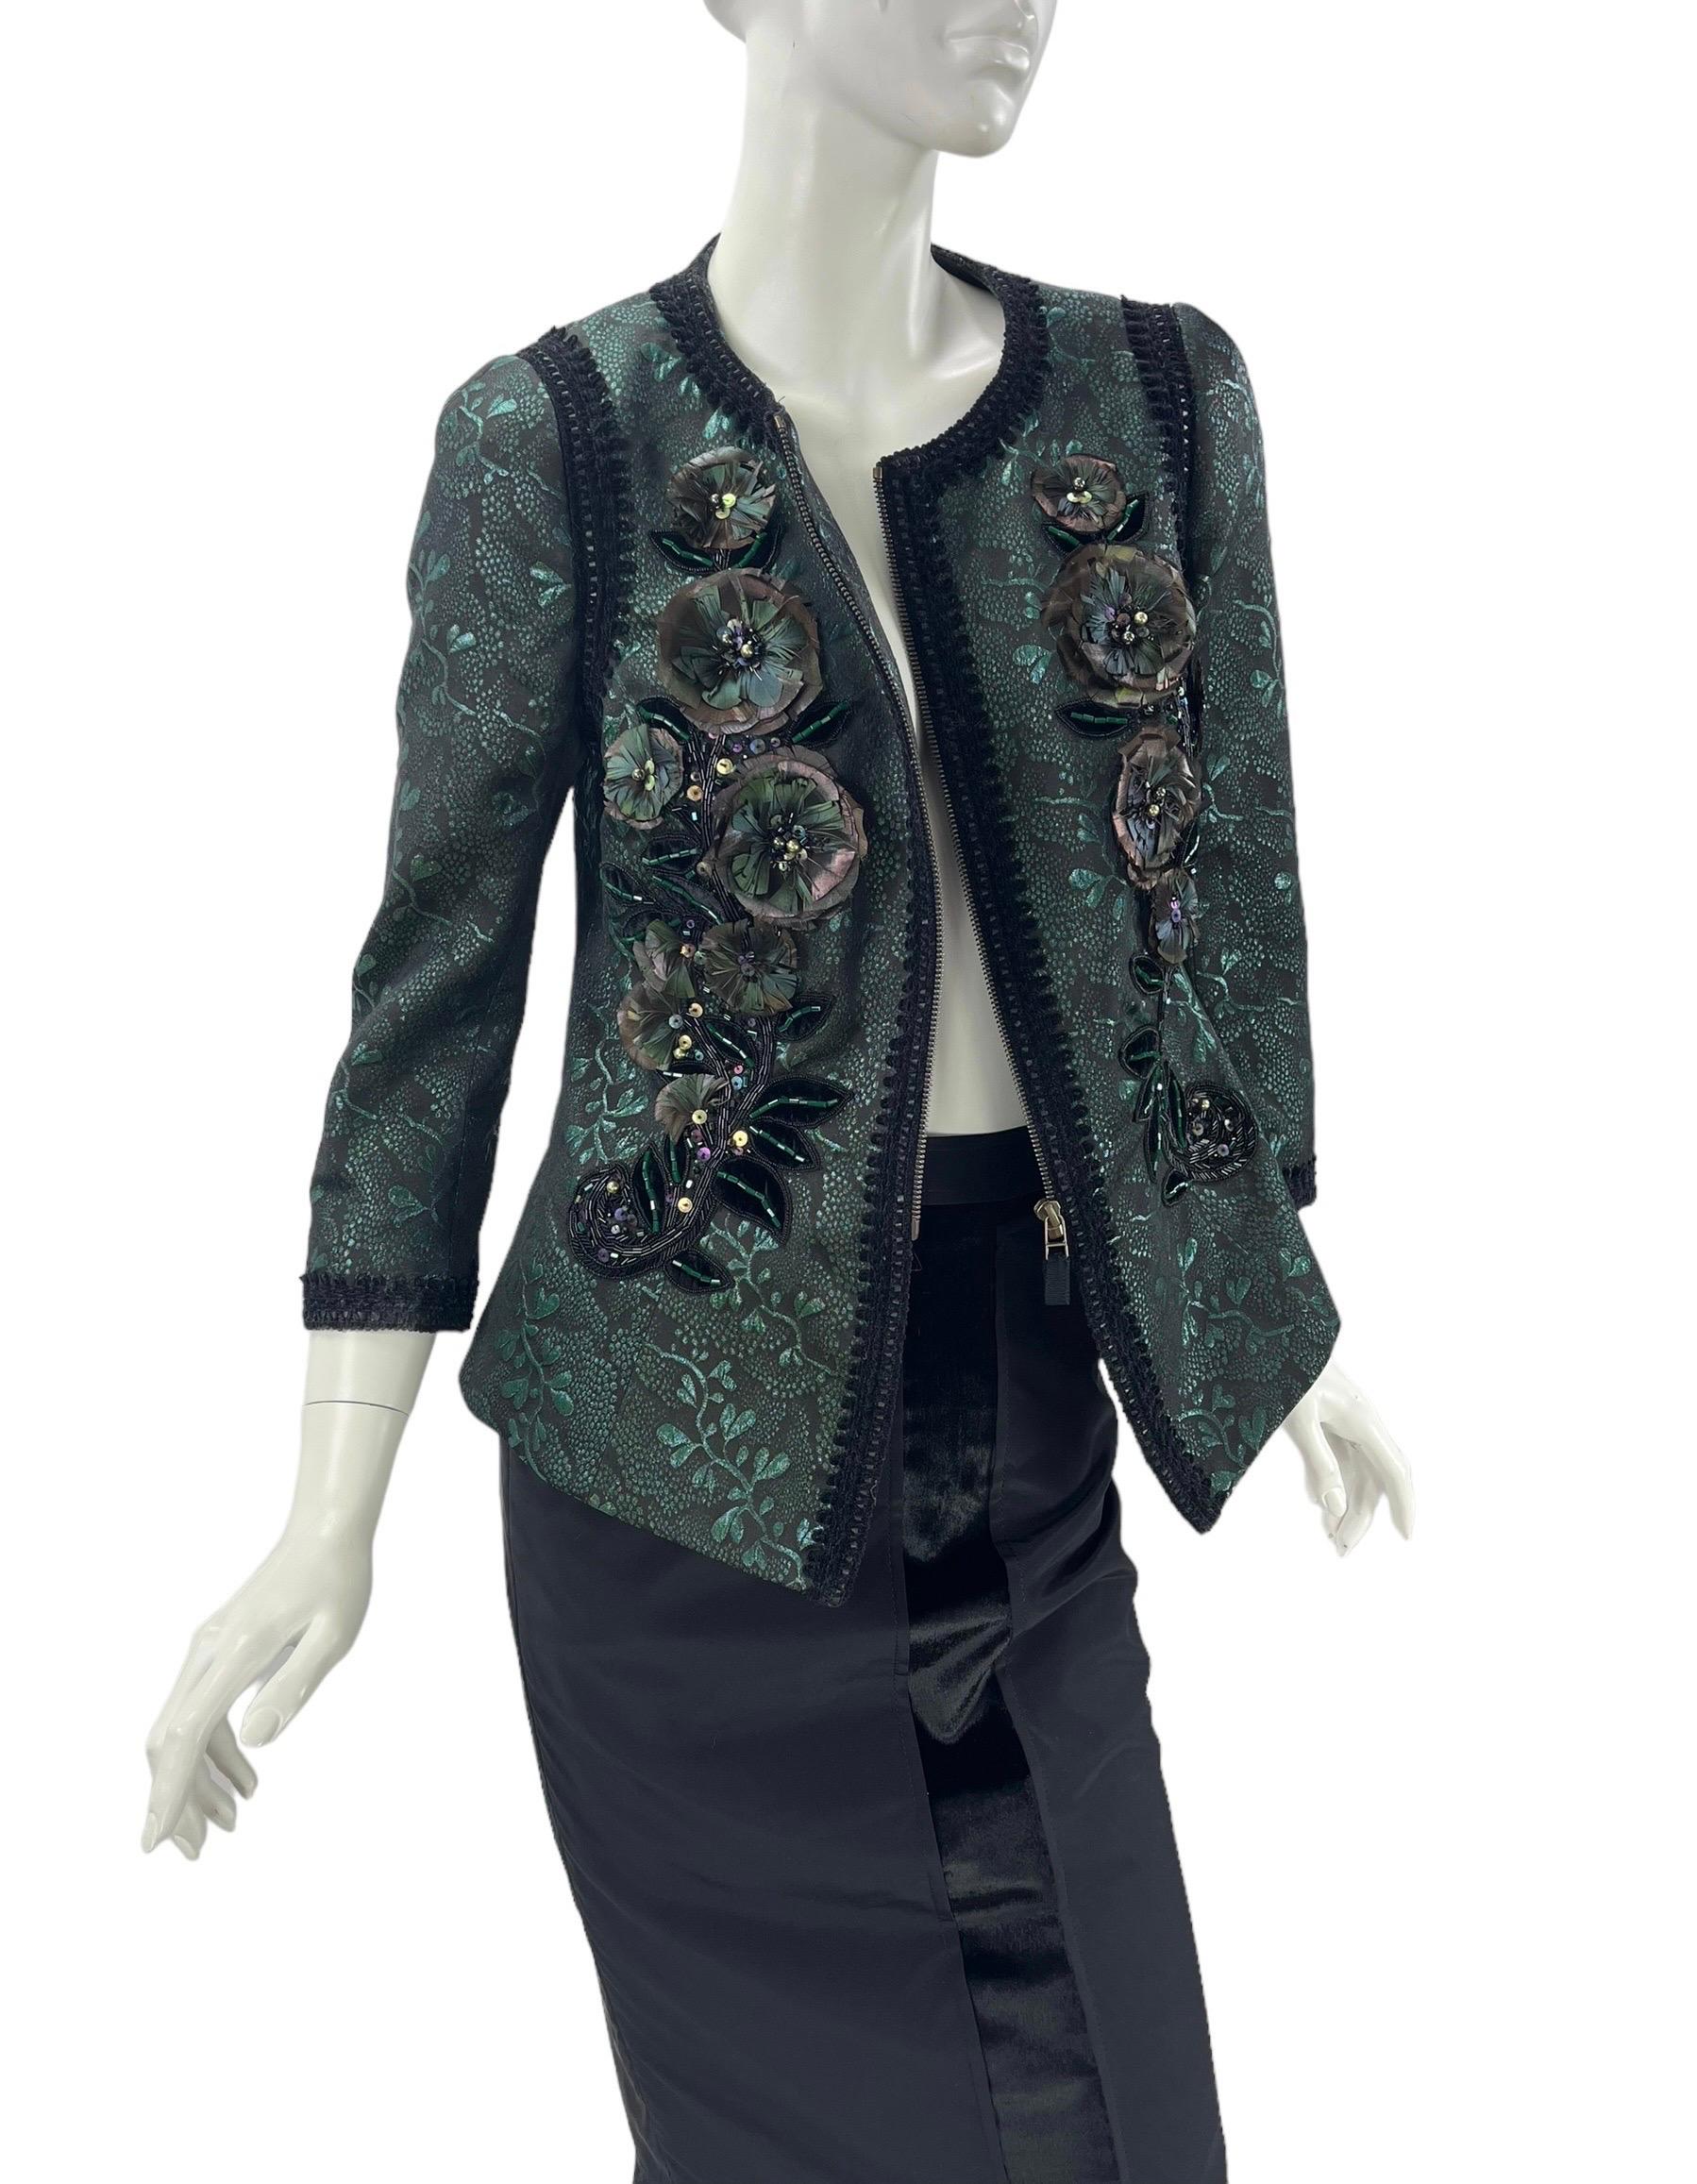 Andrew Gn Beaded & Feather Embellished Emerald Green Evening Blazer Jacket Fr 44 In New Condition For Sale In Montgomery, TX